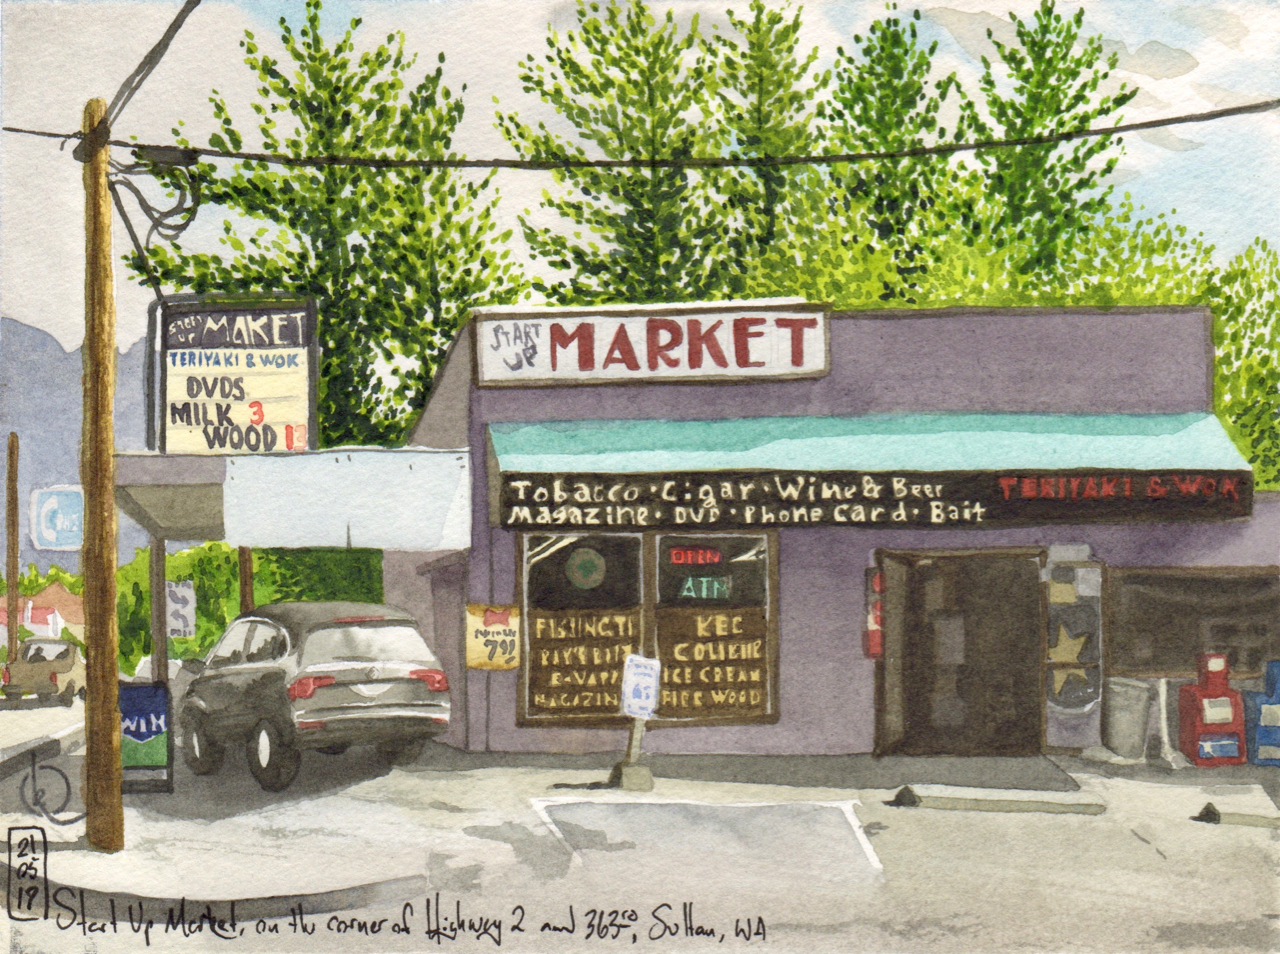 Start Up Market, on the corner of Highway 2 and 363rd Ave, Sultan, WA